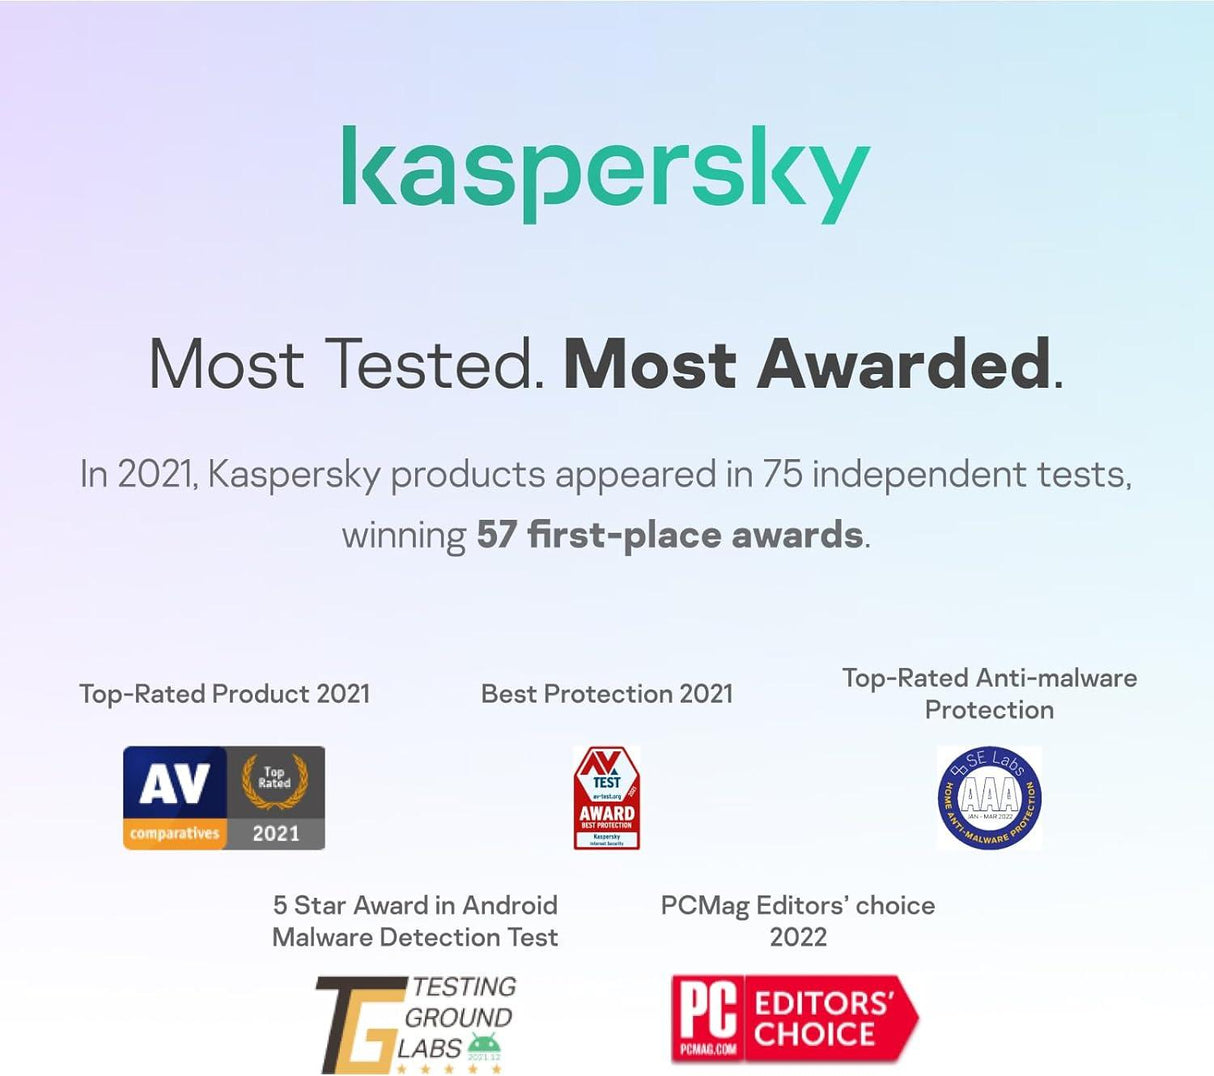 Kaspersky Plus 2023 - Instant Download for Windows and Mac (3 Computers) - SoftwareCW - Authorized Reseller